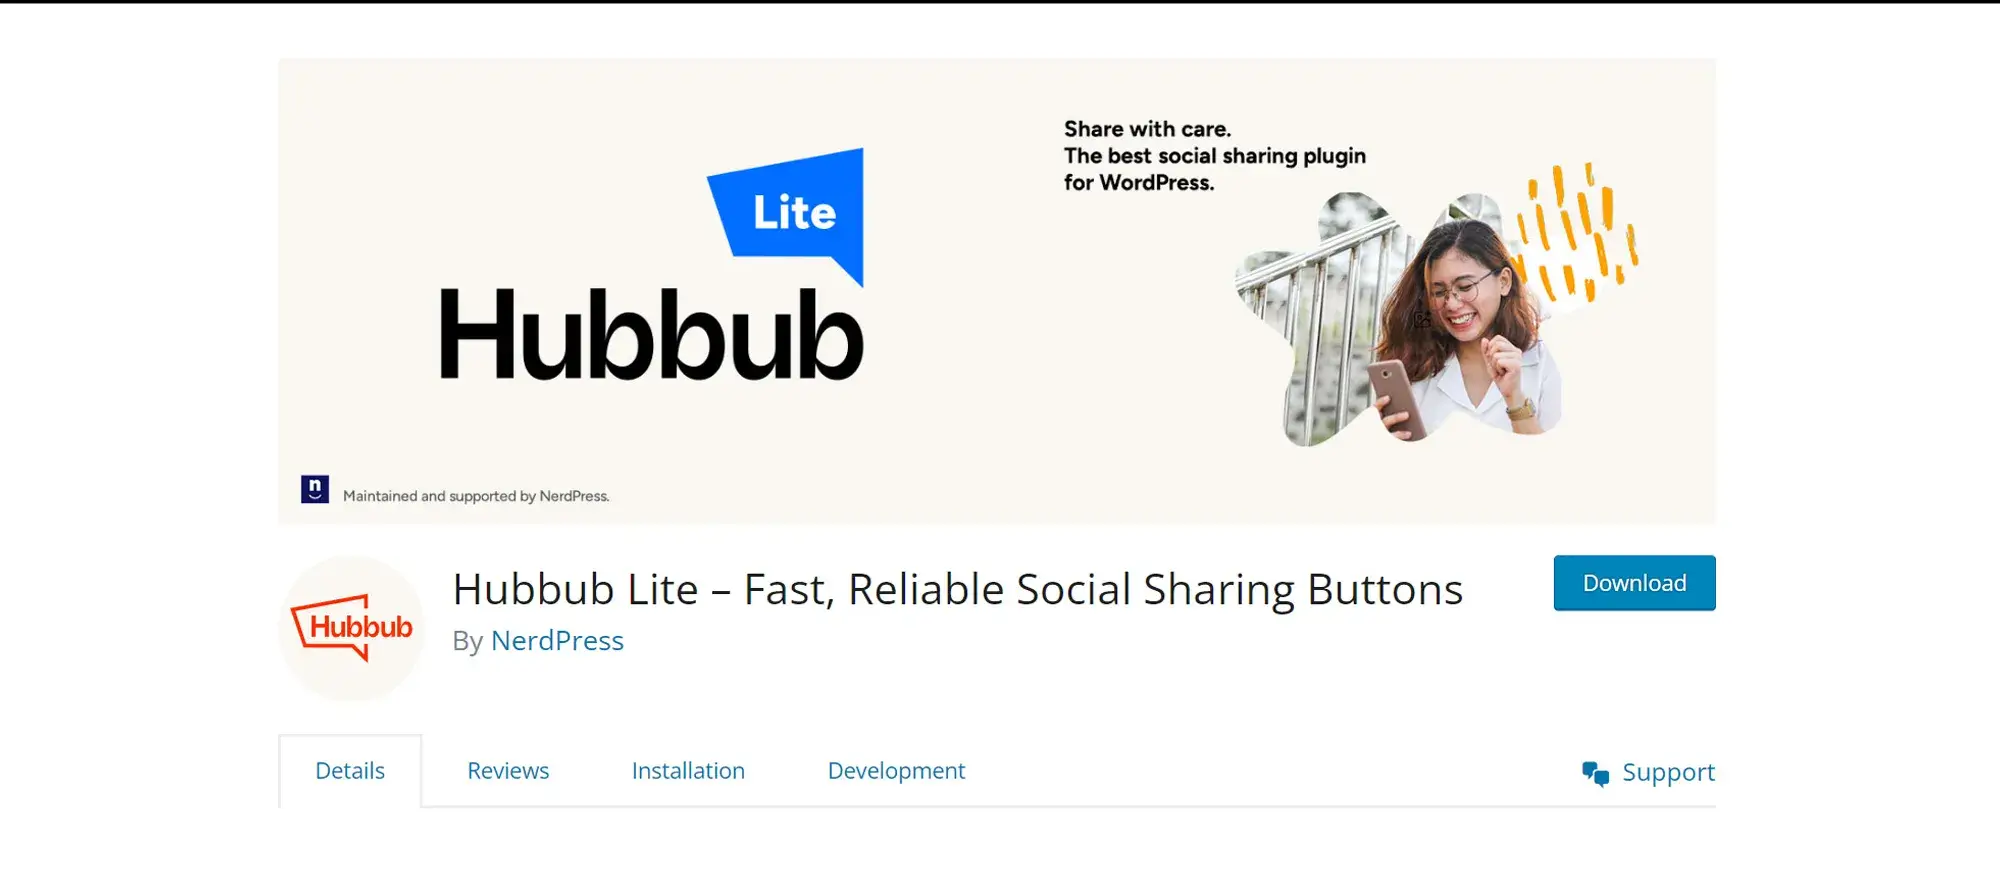 Hubbub Lite – Fast, Reliable Social Sharing Buttons